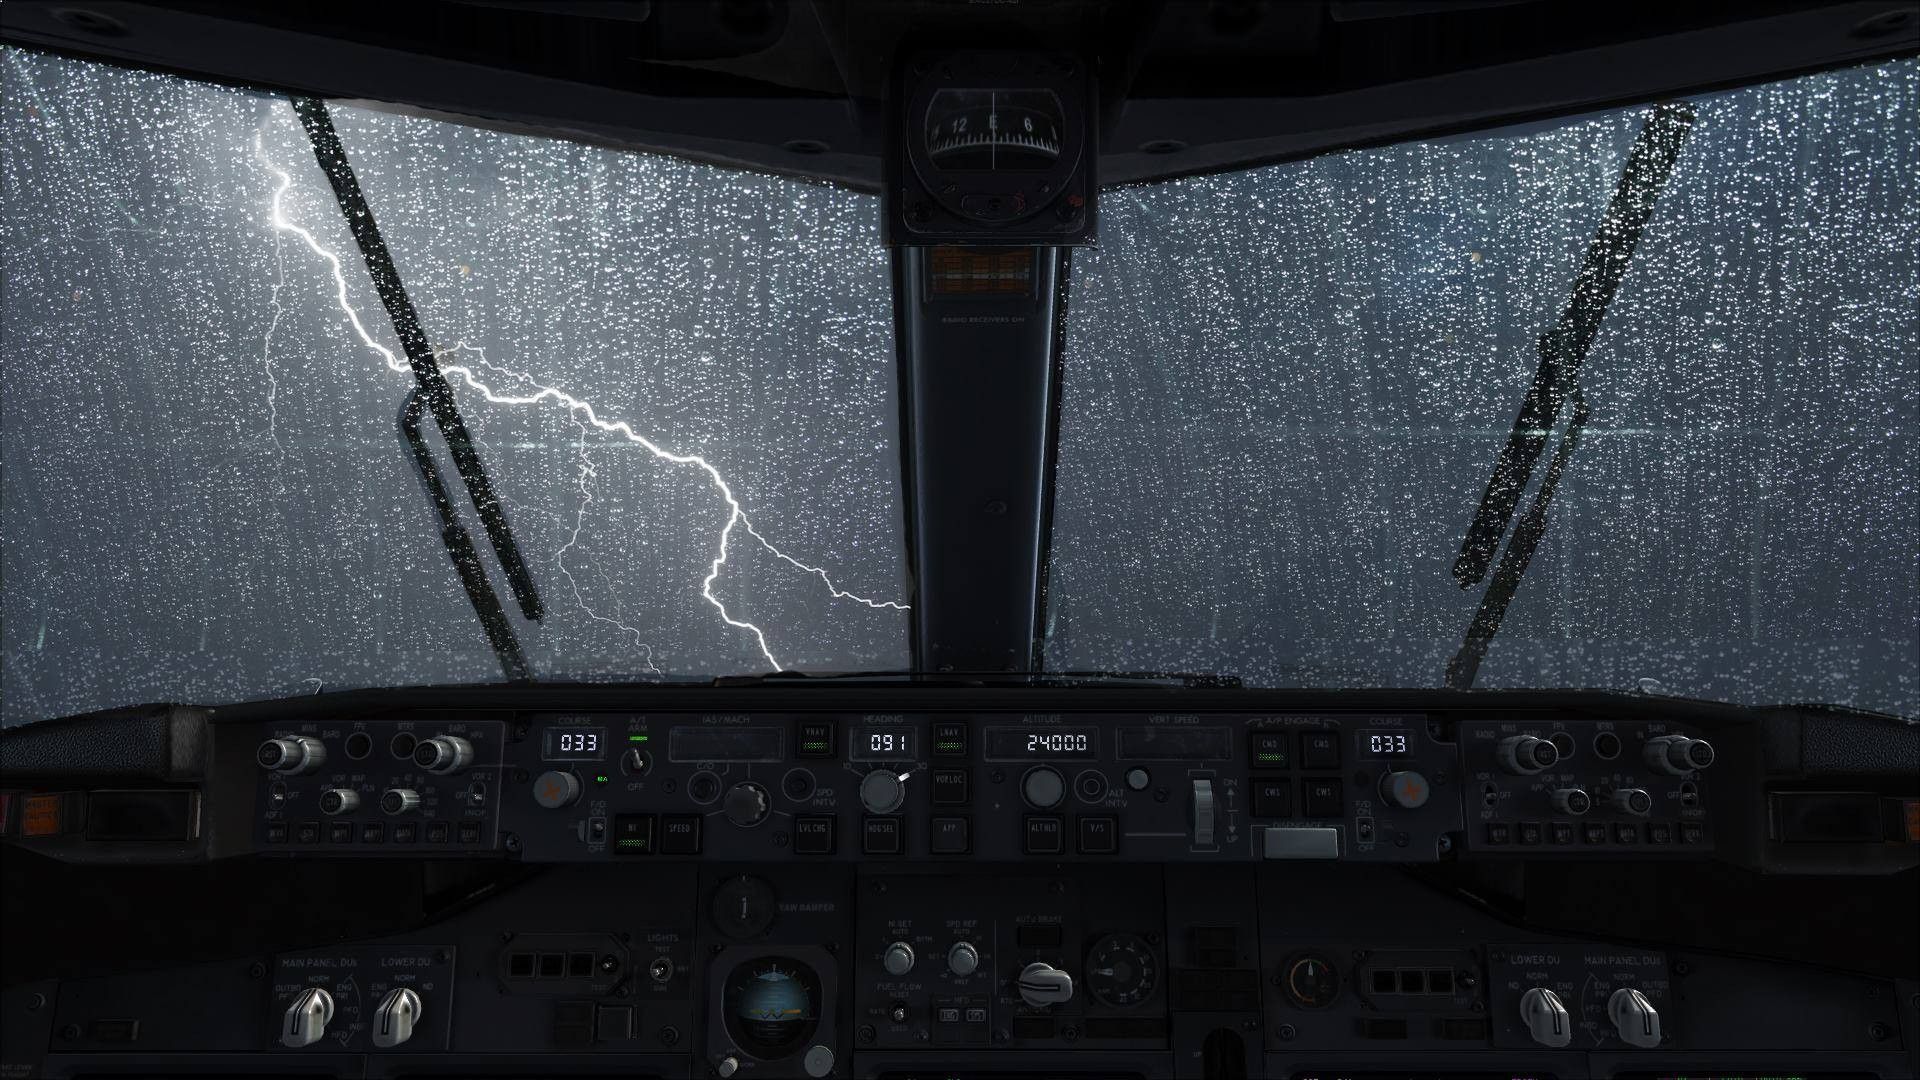 View from the cockpit of the aircraft on the storm wallpapers and other